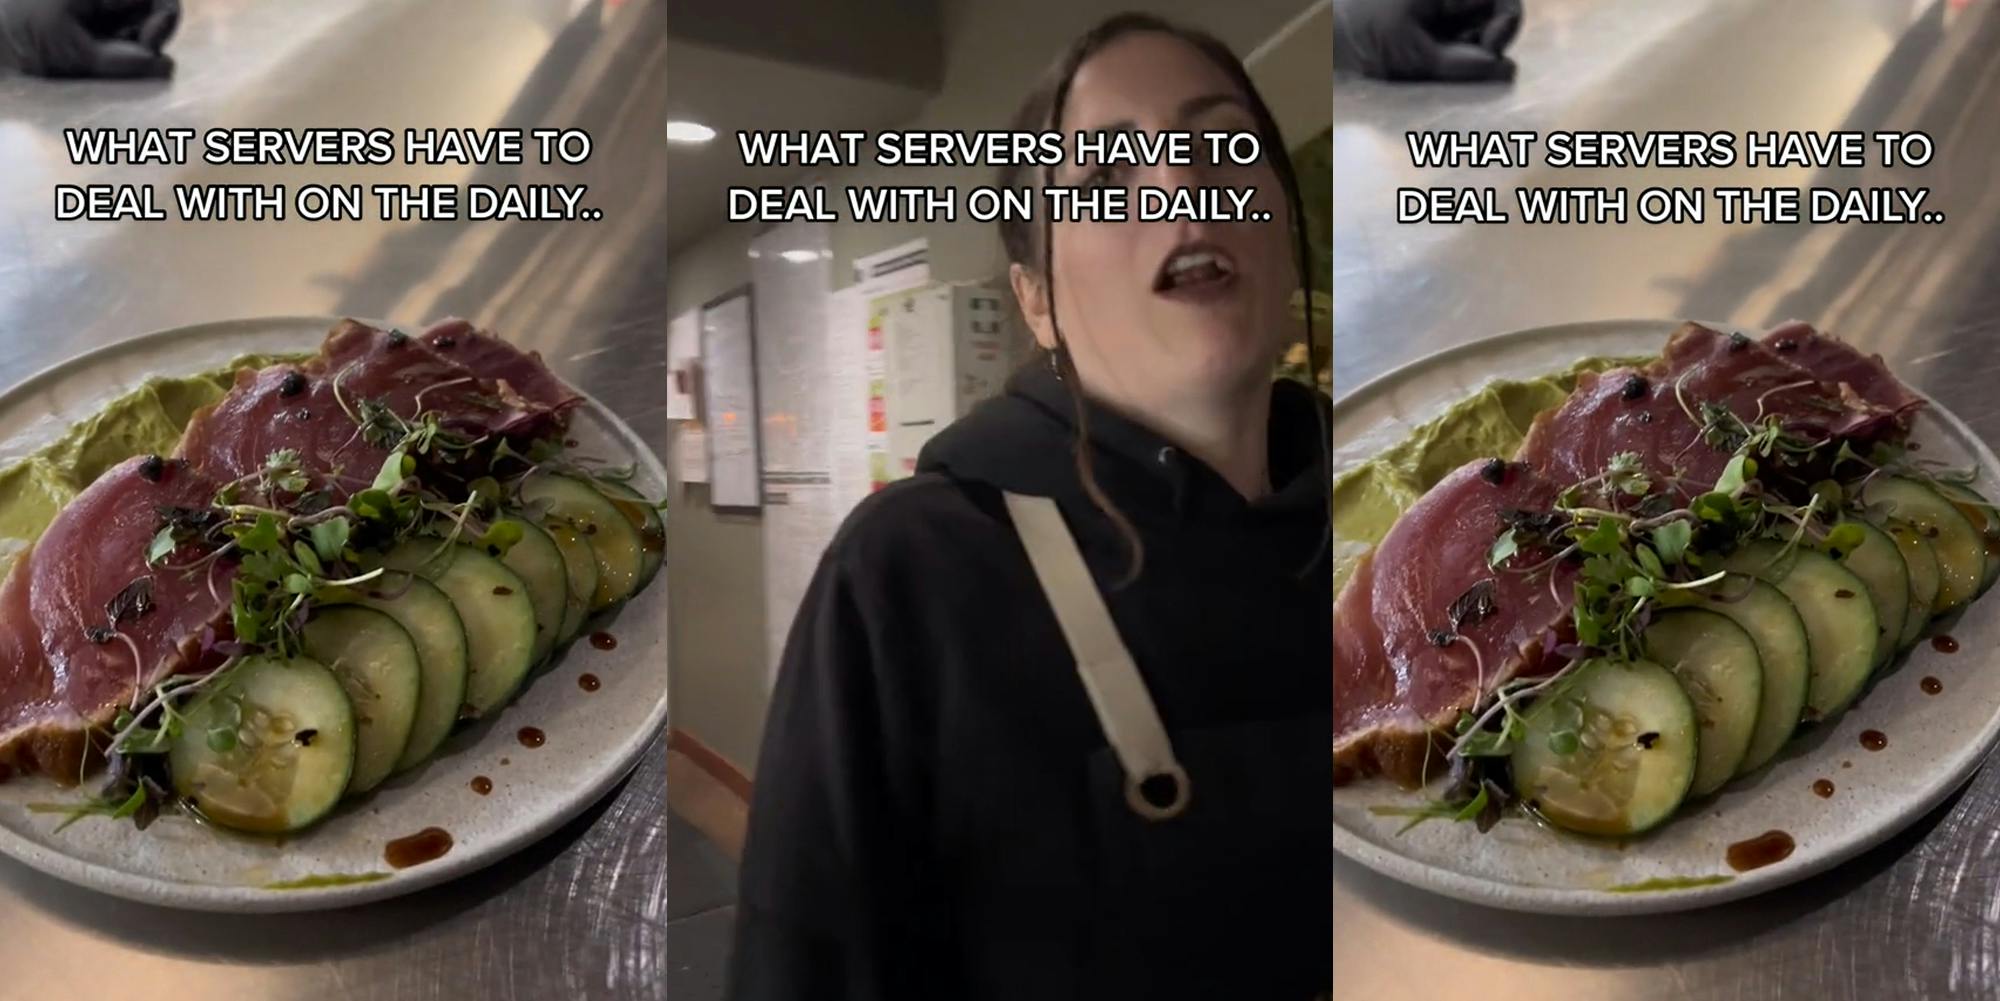 dish that customer ordered crudo caption "WHAT SERVERS HAVE TO DEAL WITH ON THE DAILY.." (l) server in kitchen speaking caption "WHAT SERVERS HAVE TO DEAL WITH ON THE DAILY.." (c) dish that customer ordered crudo caption "WHAT SERVERS HAVE TO DEAL WITH ON THE DAILY.." (r)